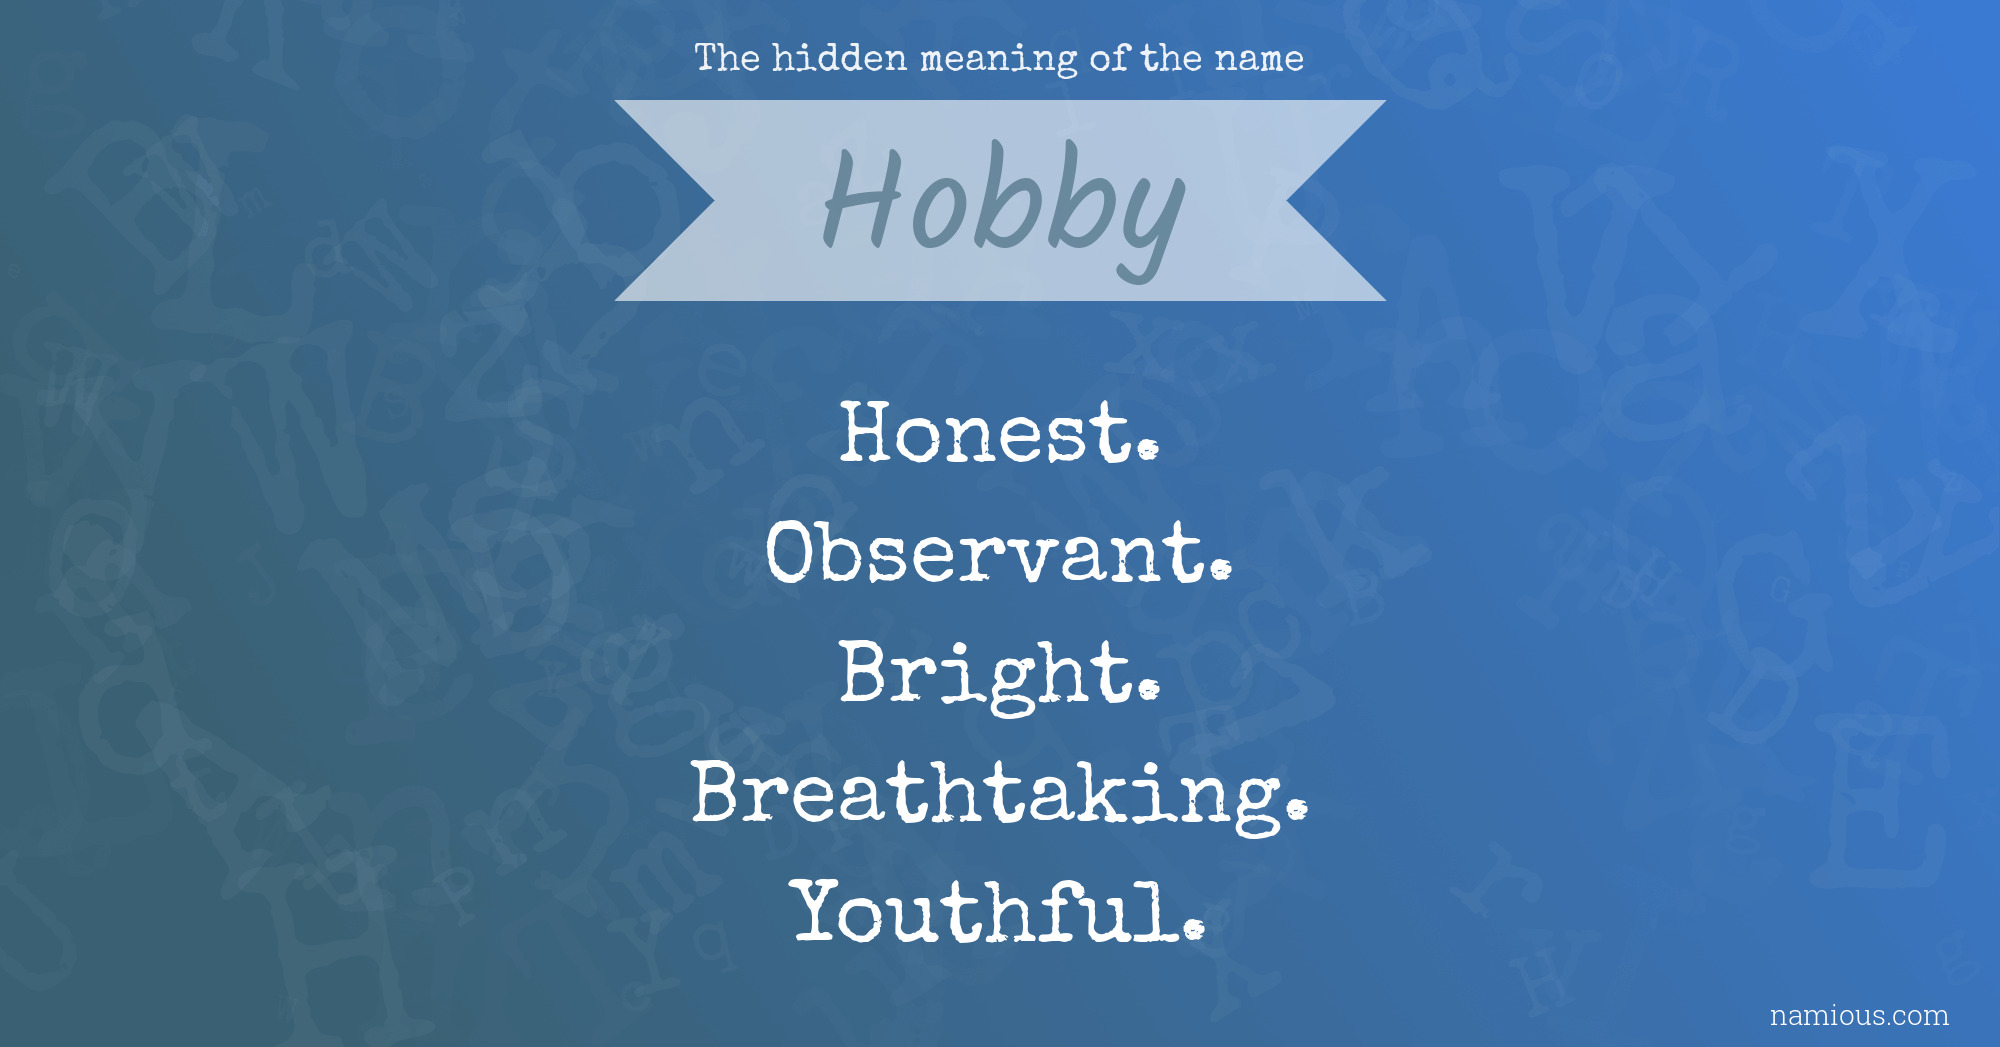 The hidden meaning of the name Hobby